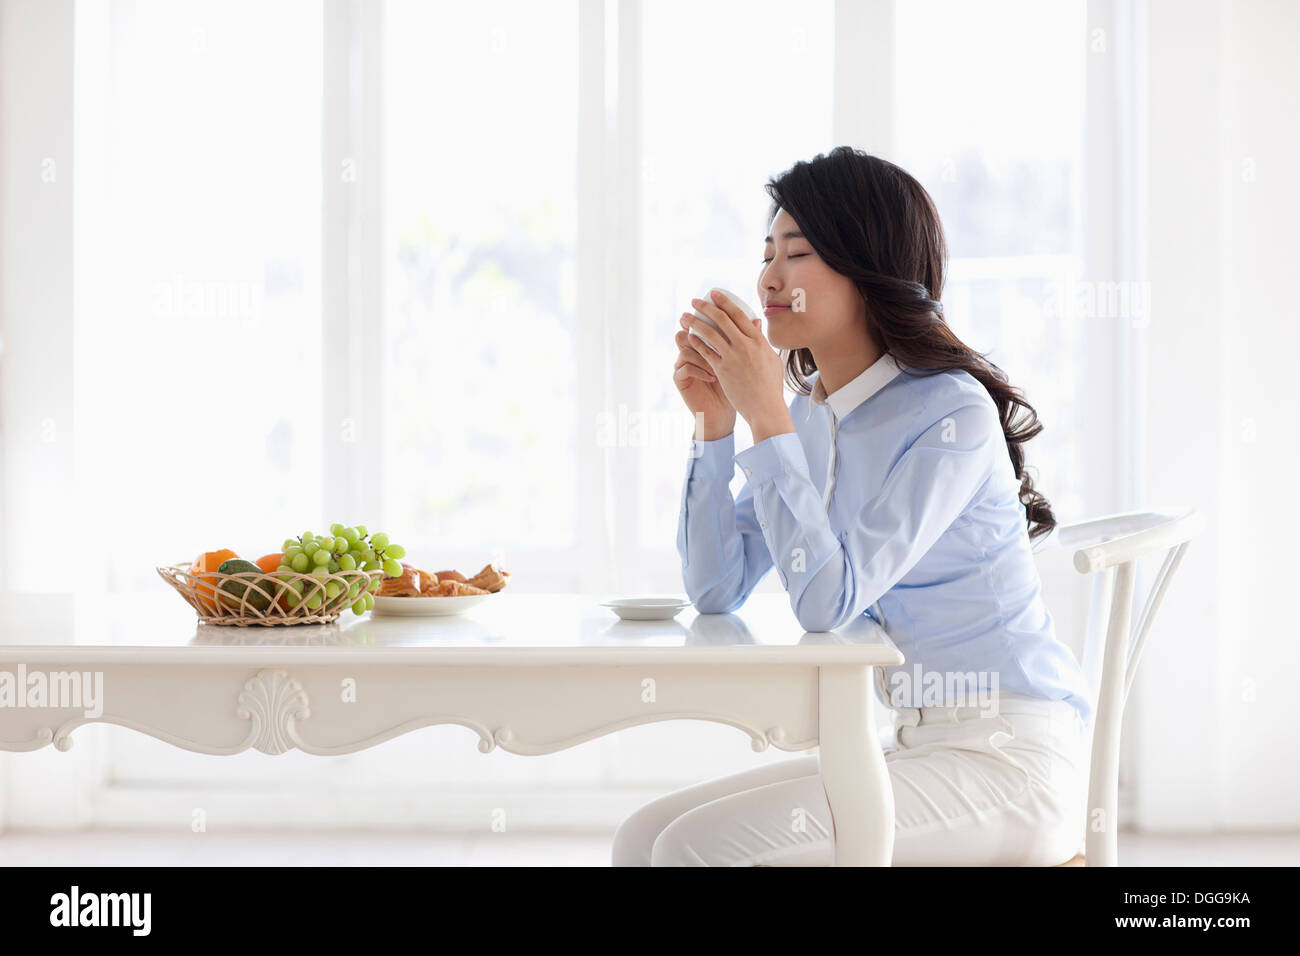 a young woman eating breakfast and working Stock Photo